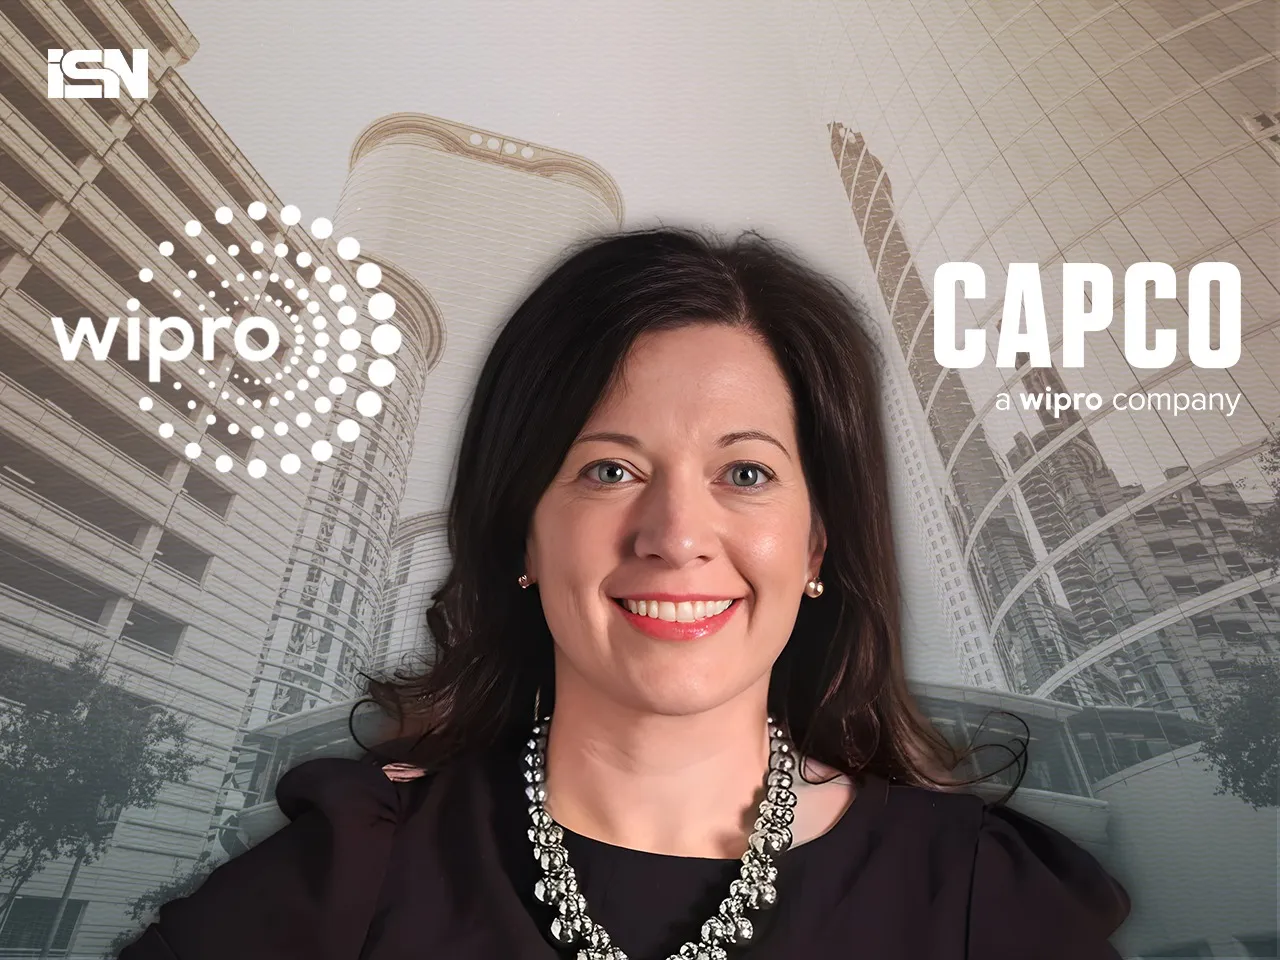 Wipro appoints Anne-Marie Rowland as new CEO of Capco